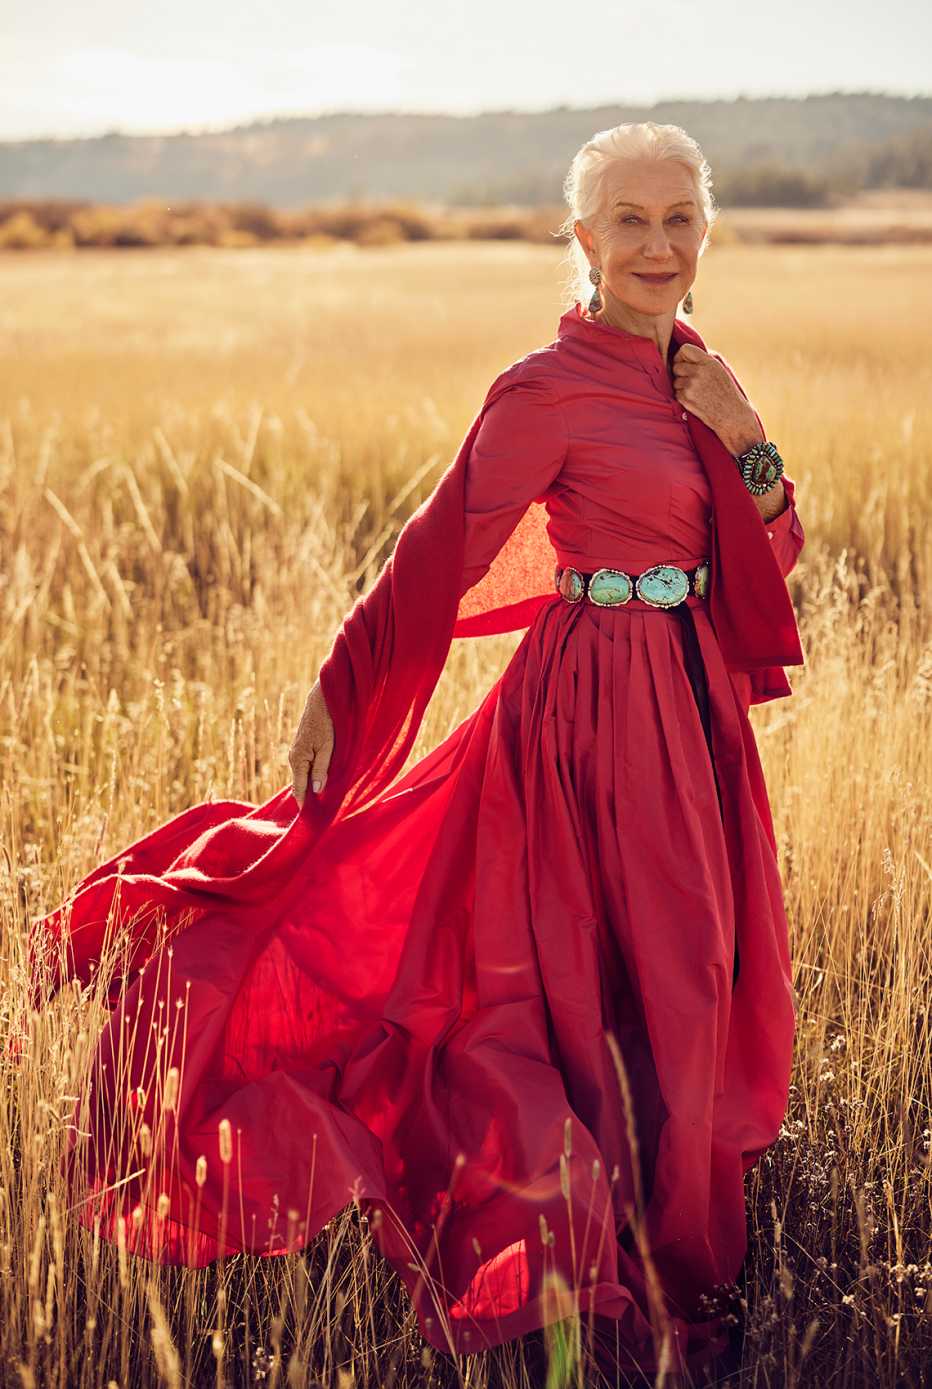 Helen Mirren in a red dress with Western accent pieces posing in a sunlit field